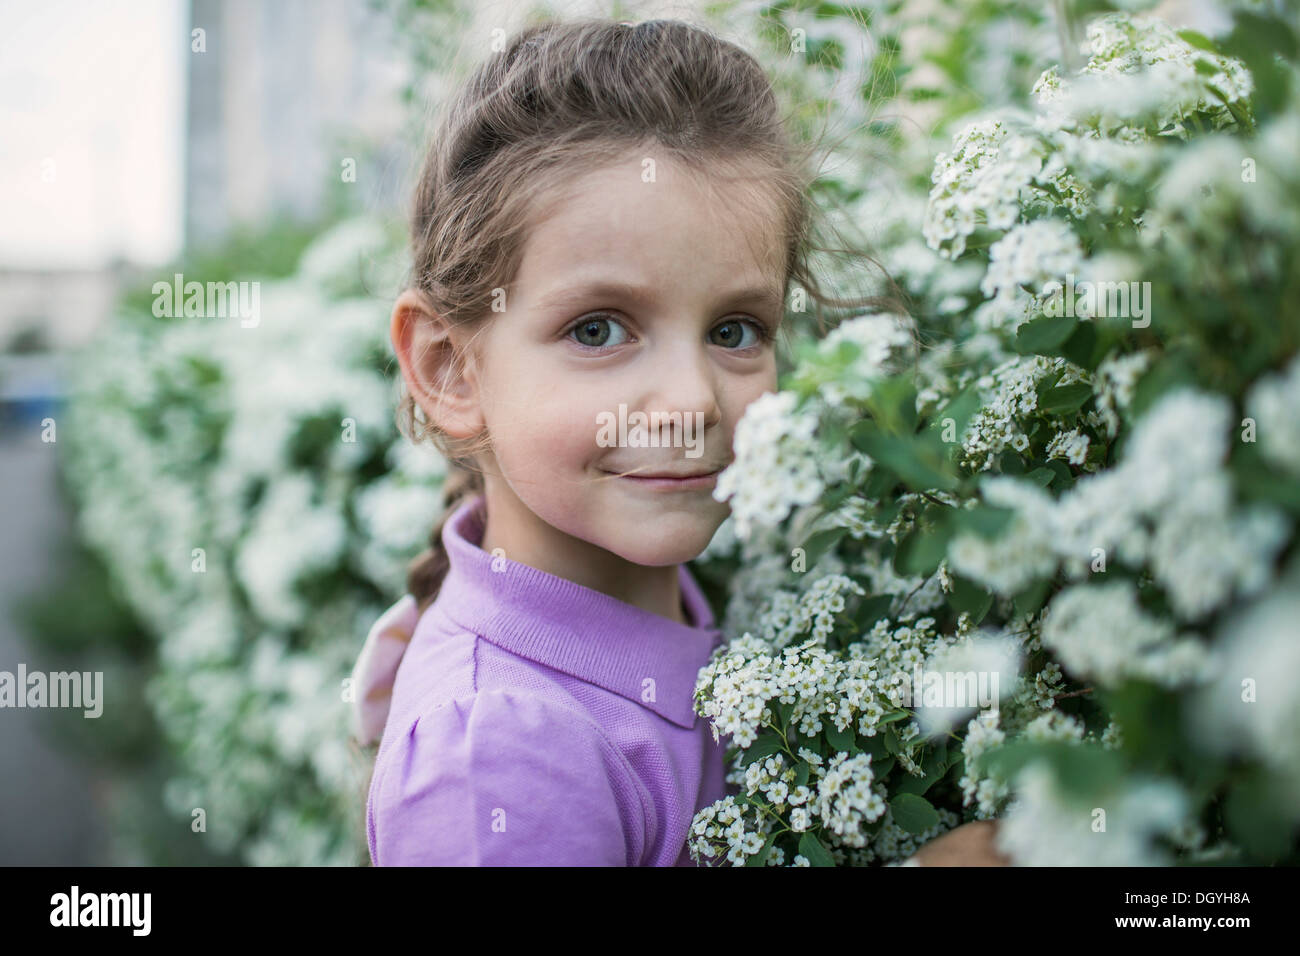 A young girl smelling flowers Stock Photo